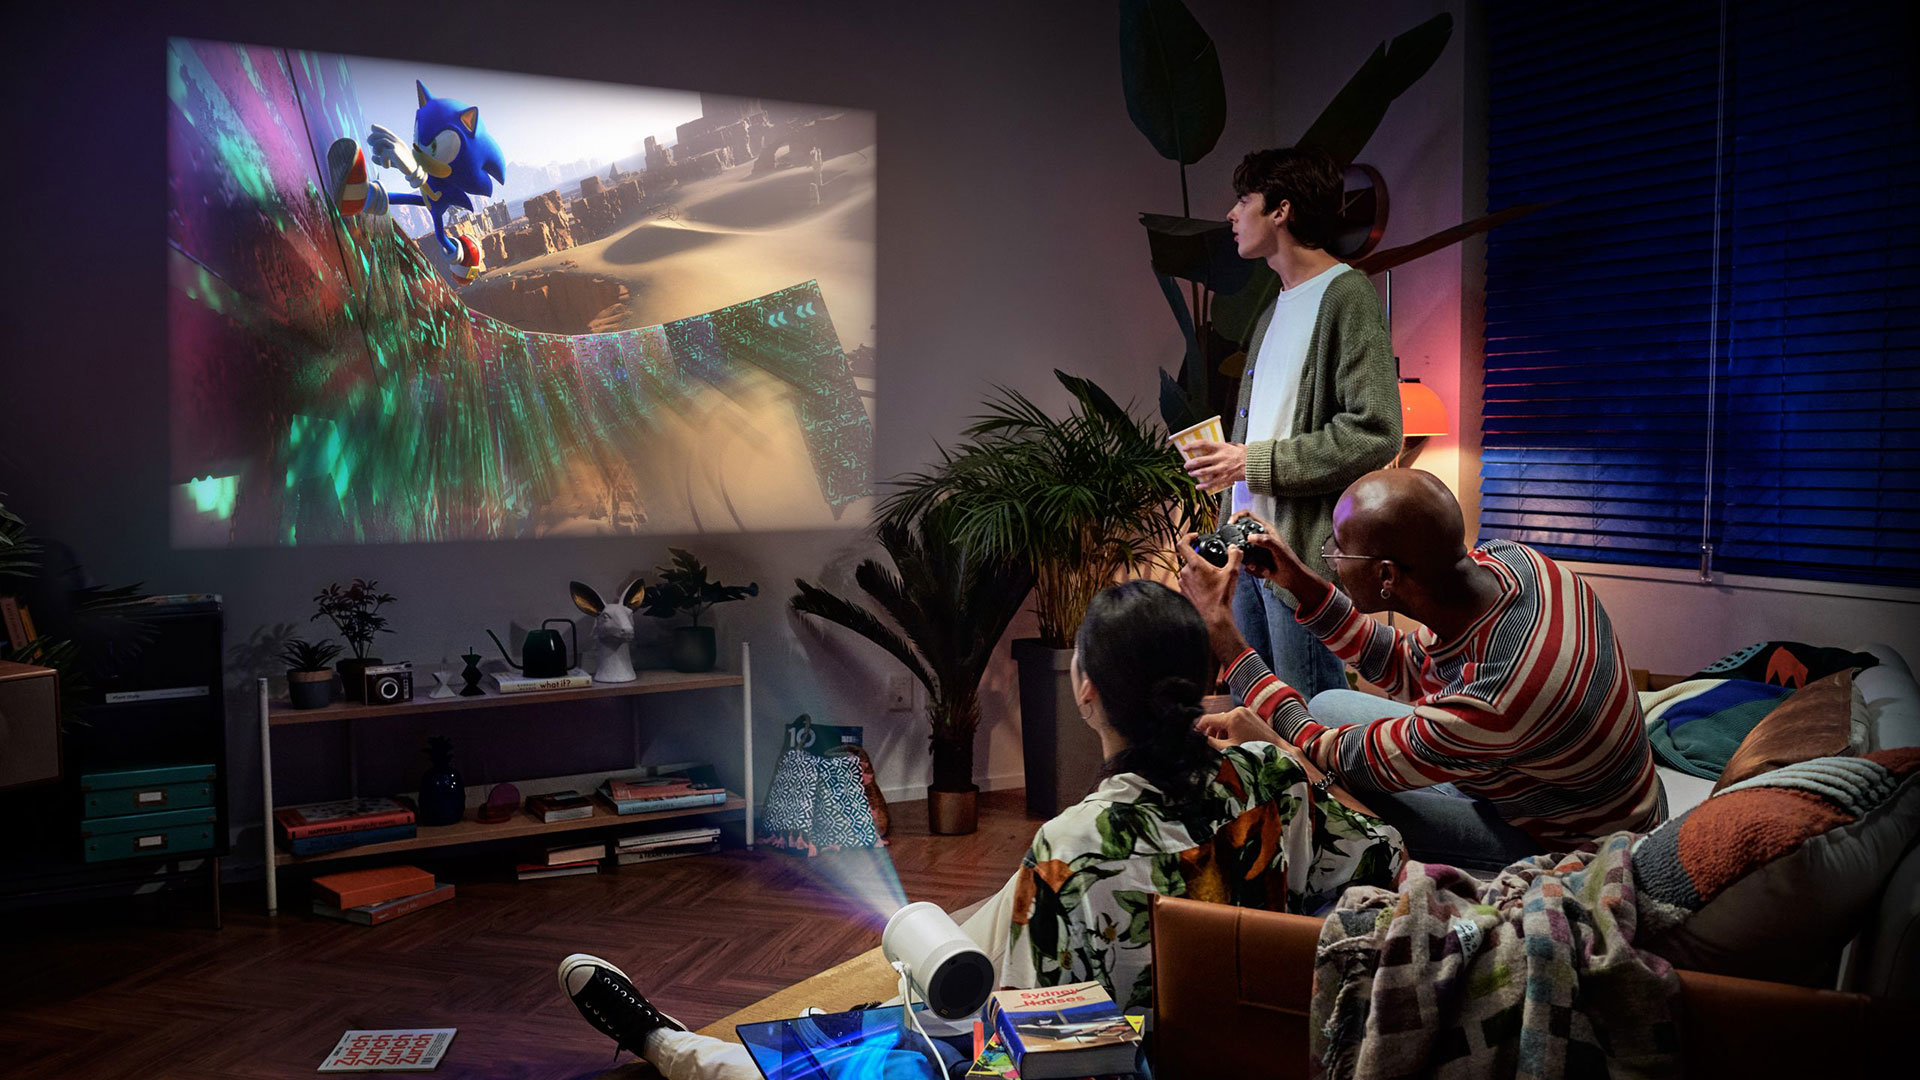 Samsung's Freestyle Gen 2 is the world's first portable projector with built-in cloud gaming